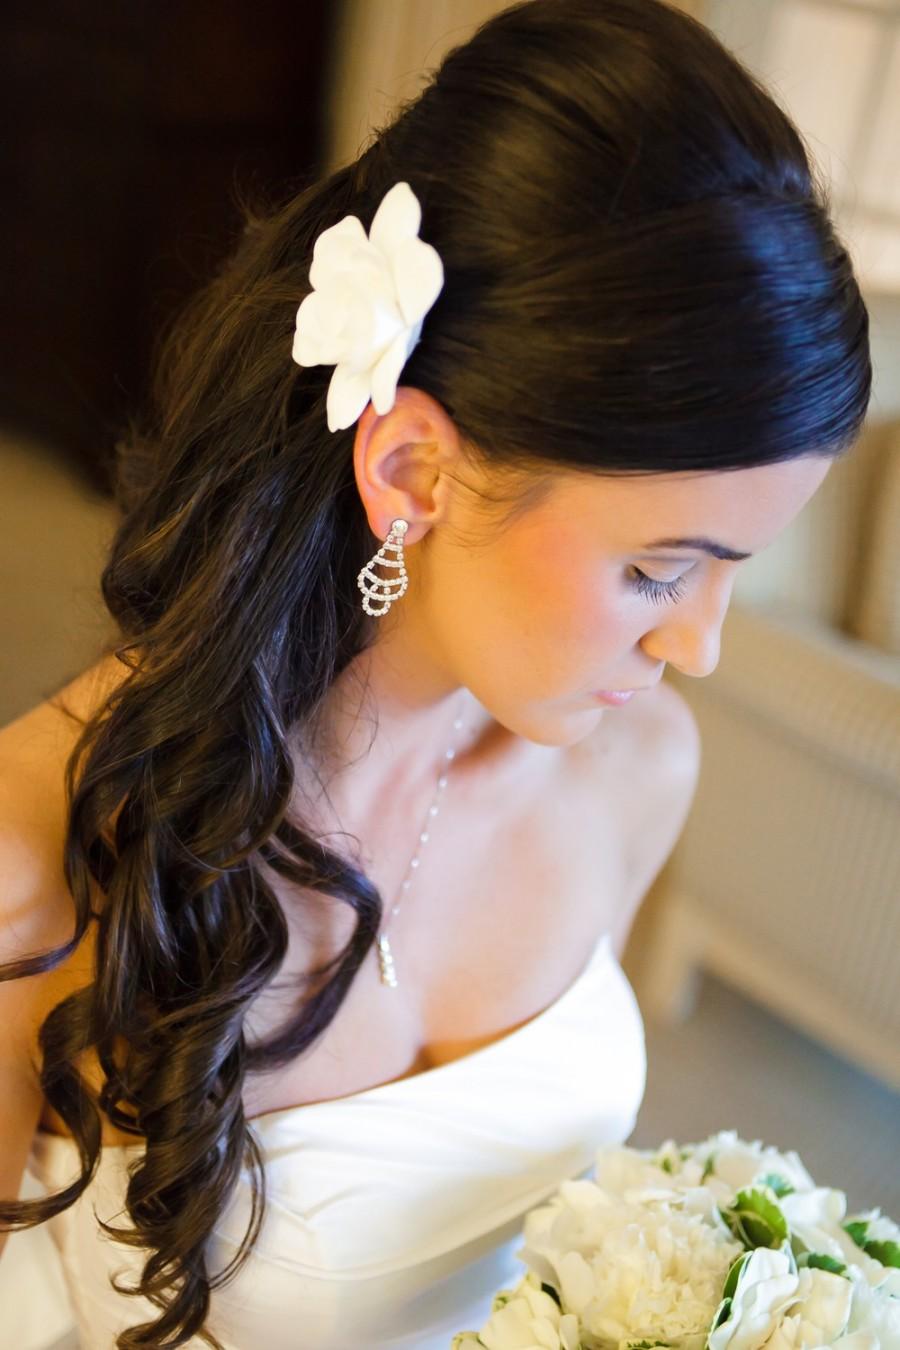 Wedding - Ready to Ship - The Original Gardenia Hair Flower for Weddings as seen in Southern Weddings  Magazine in Antique White with Alligator Clip